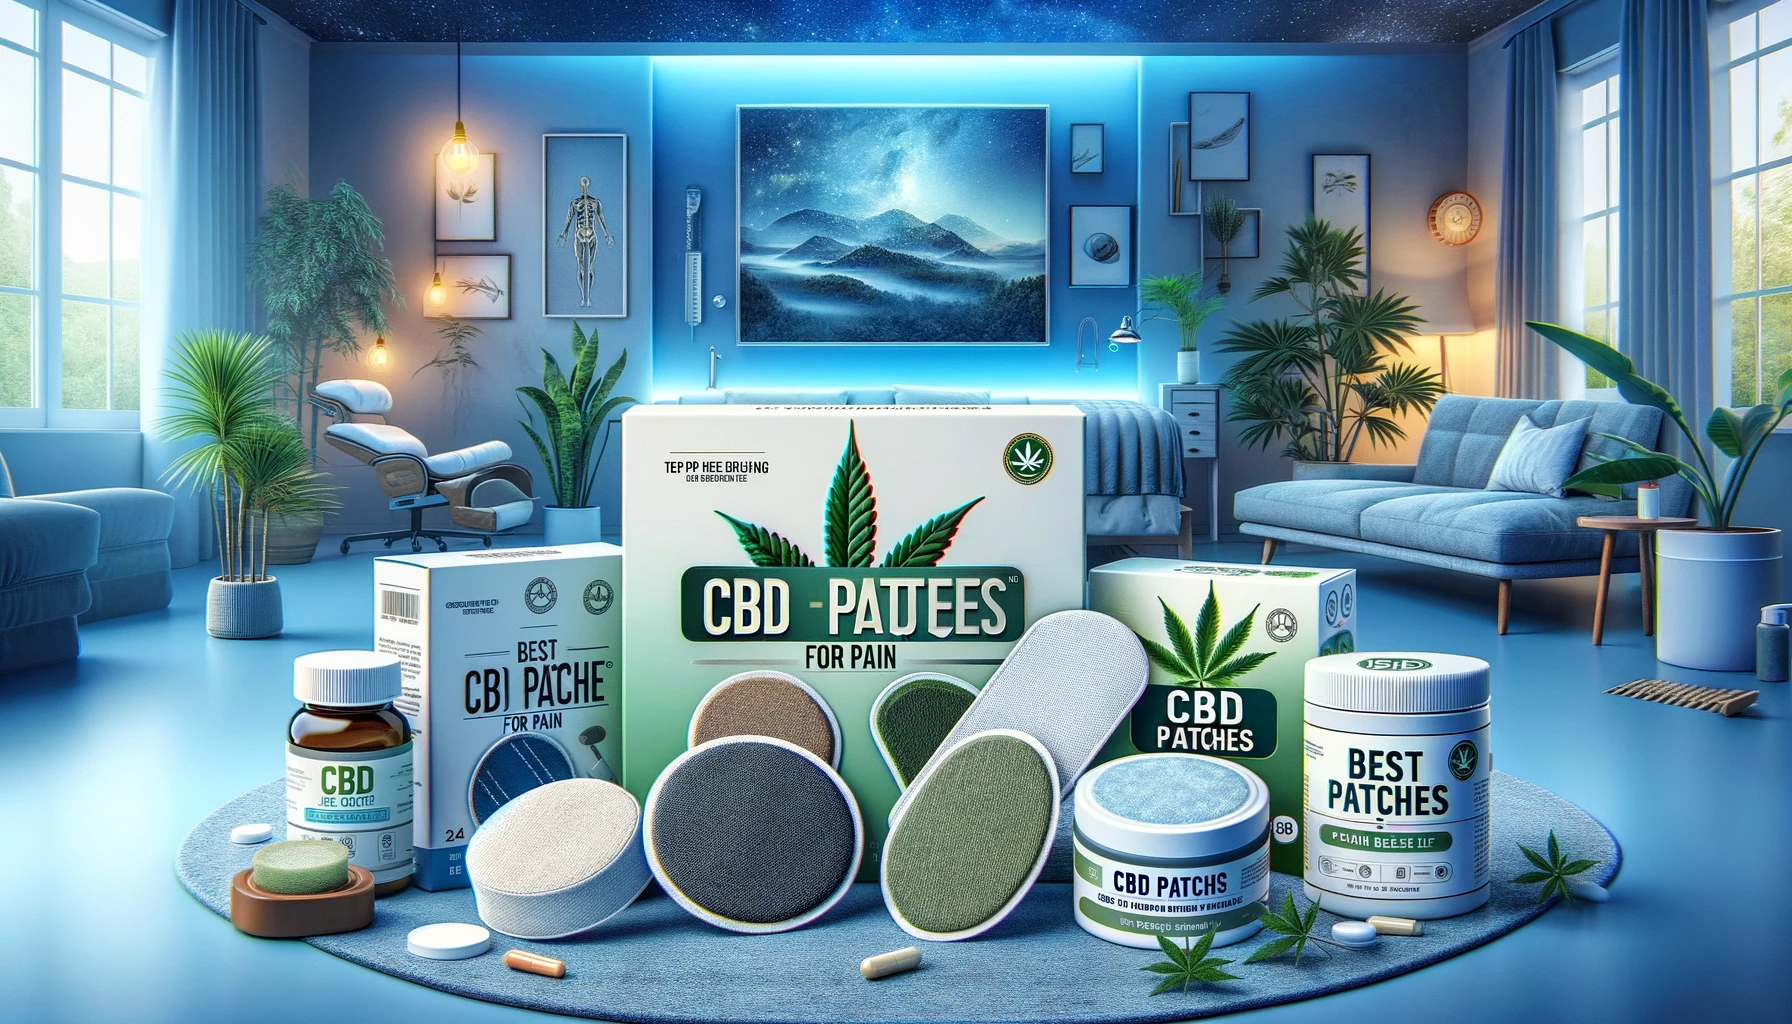 Best CBD Patches for Pain in the UK